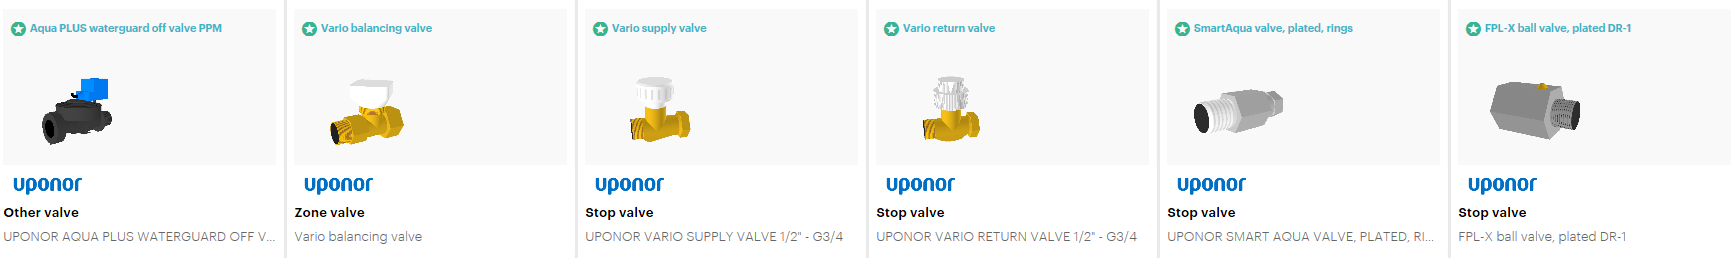 valves-uponor